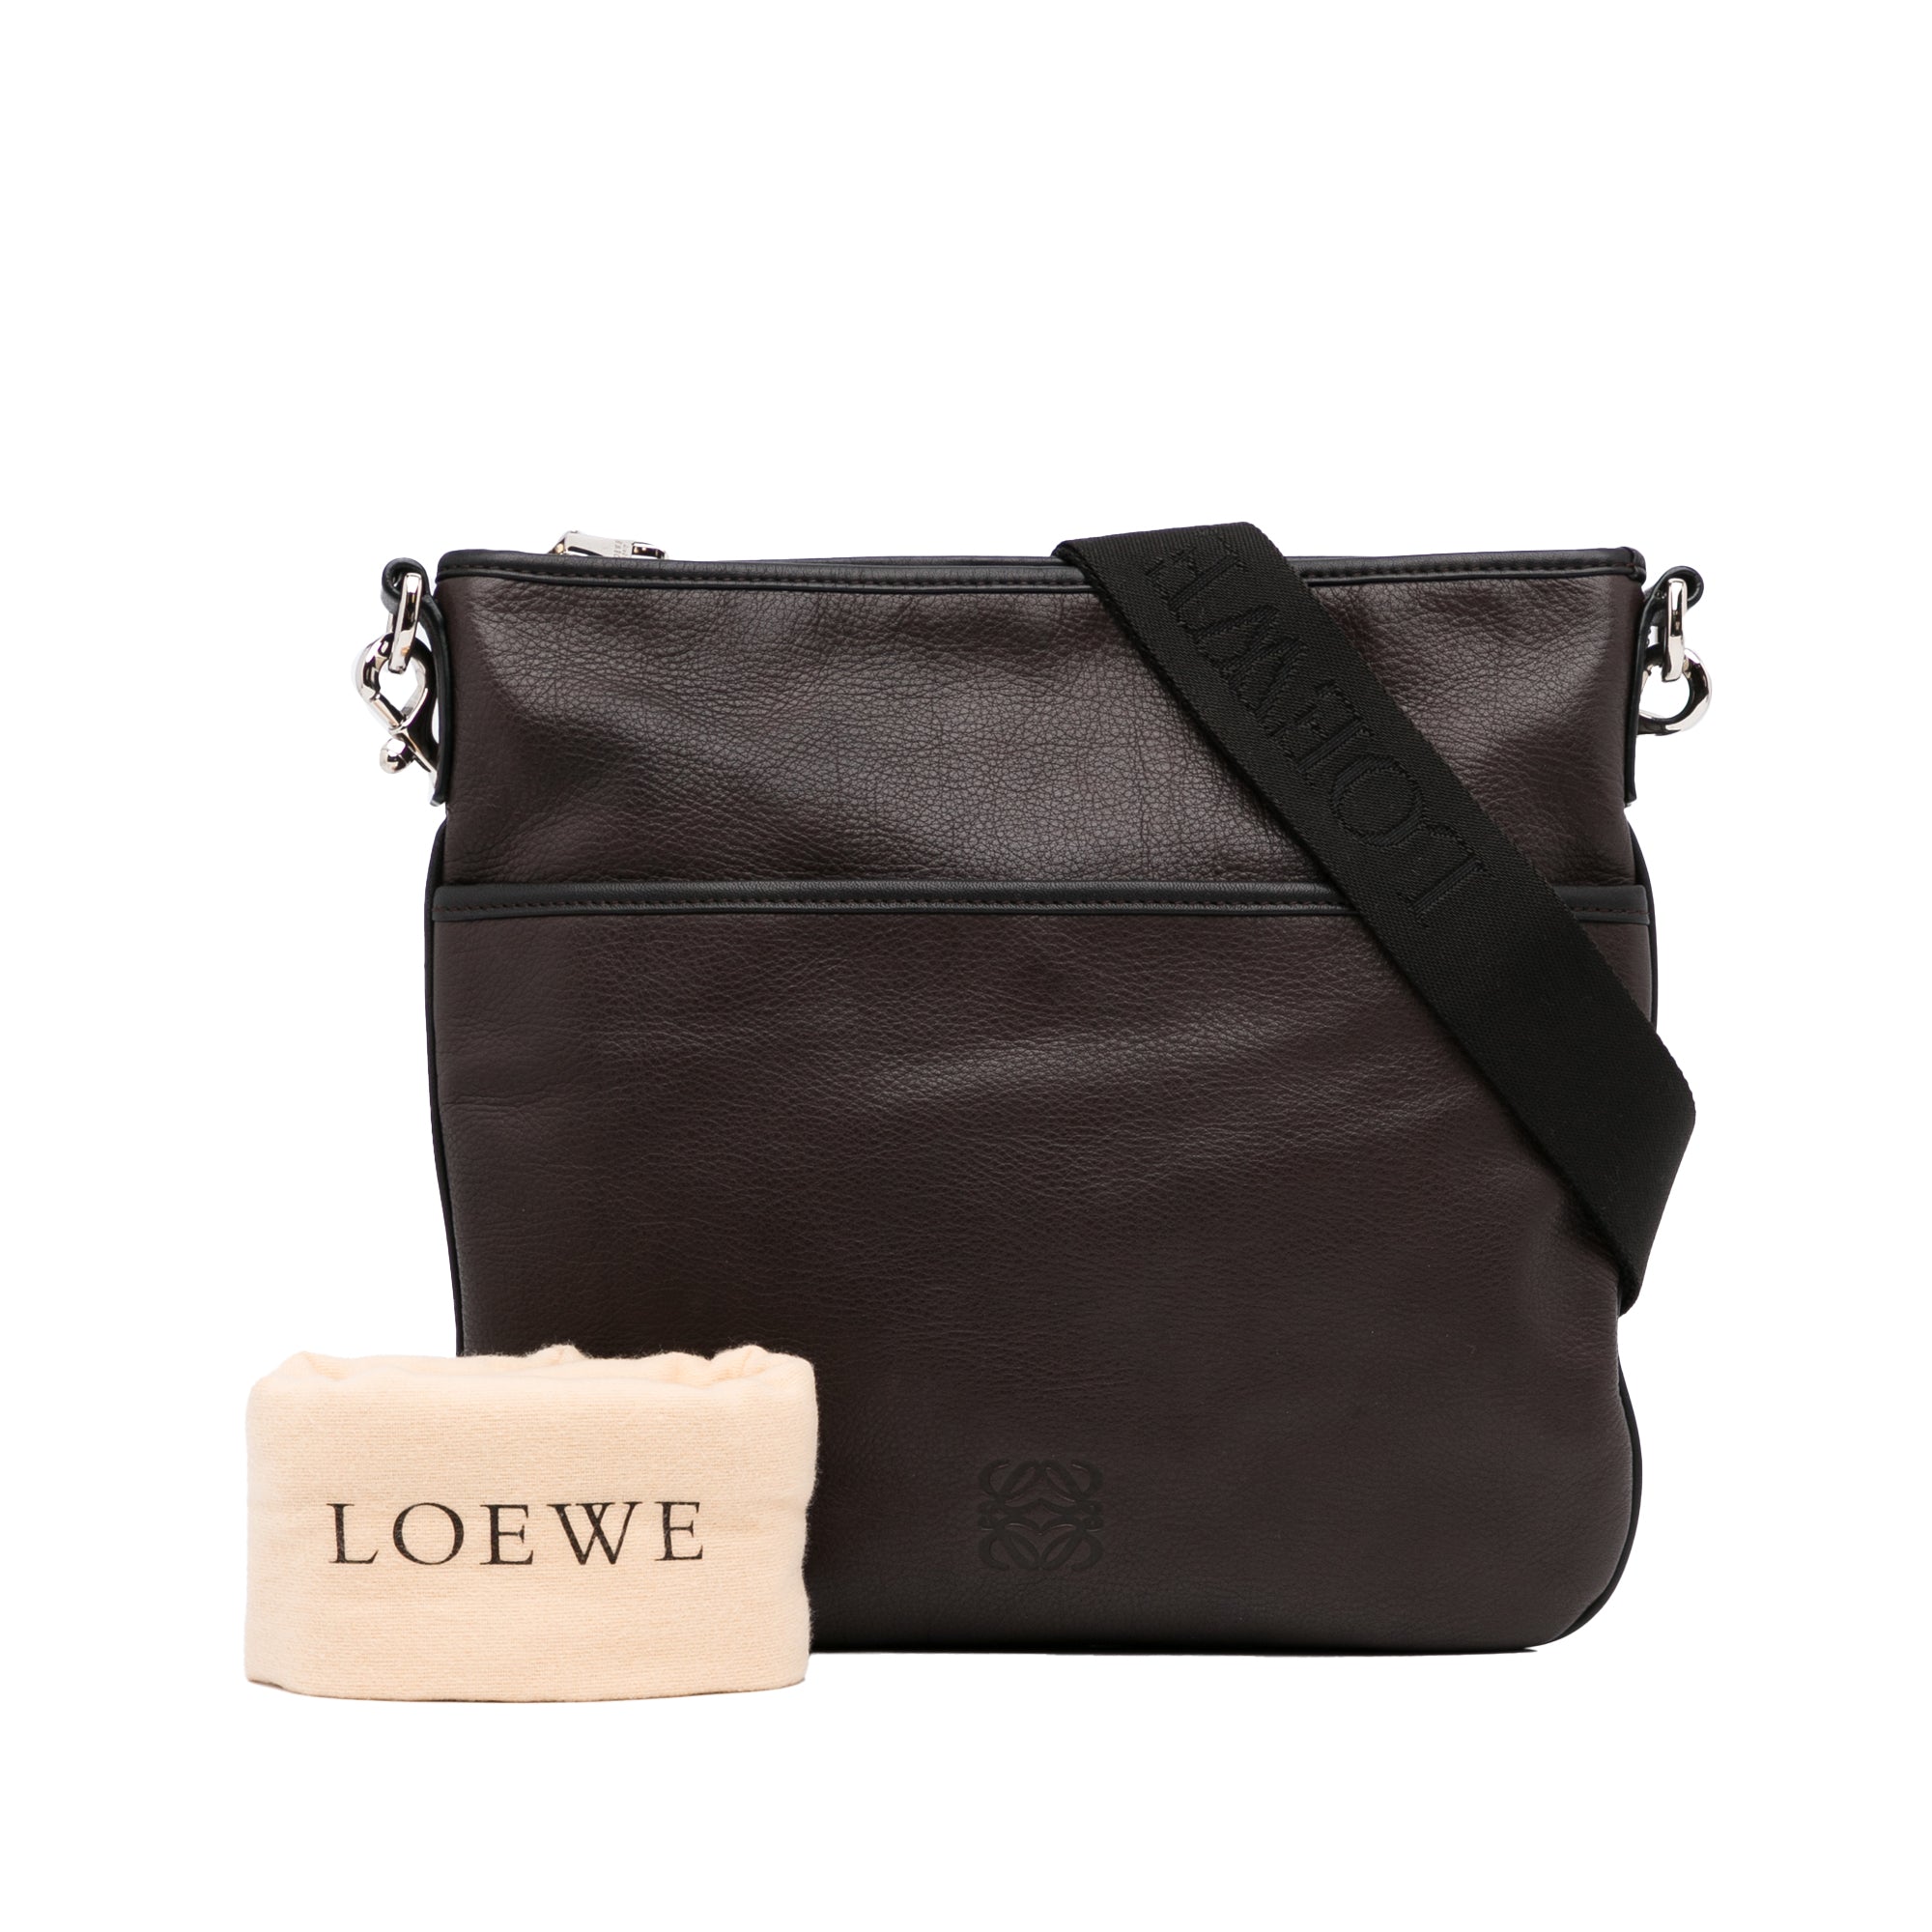 Authentic LOEWE Anagram Shoulder Cross Body Bag Suede Leather